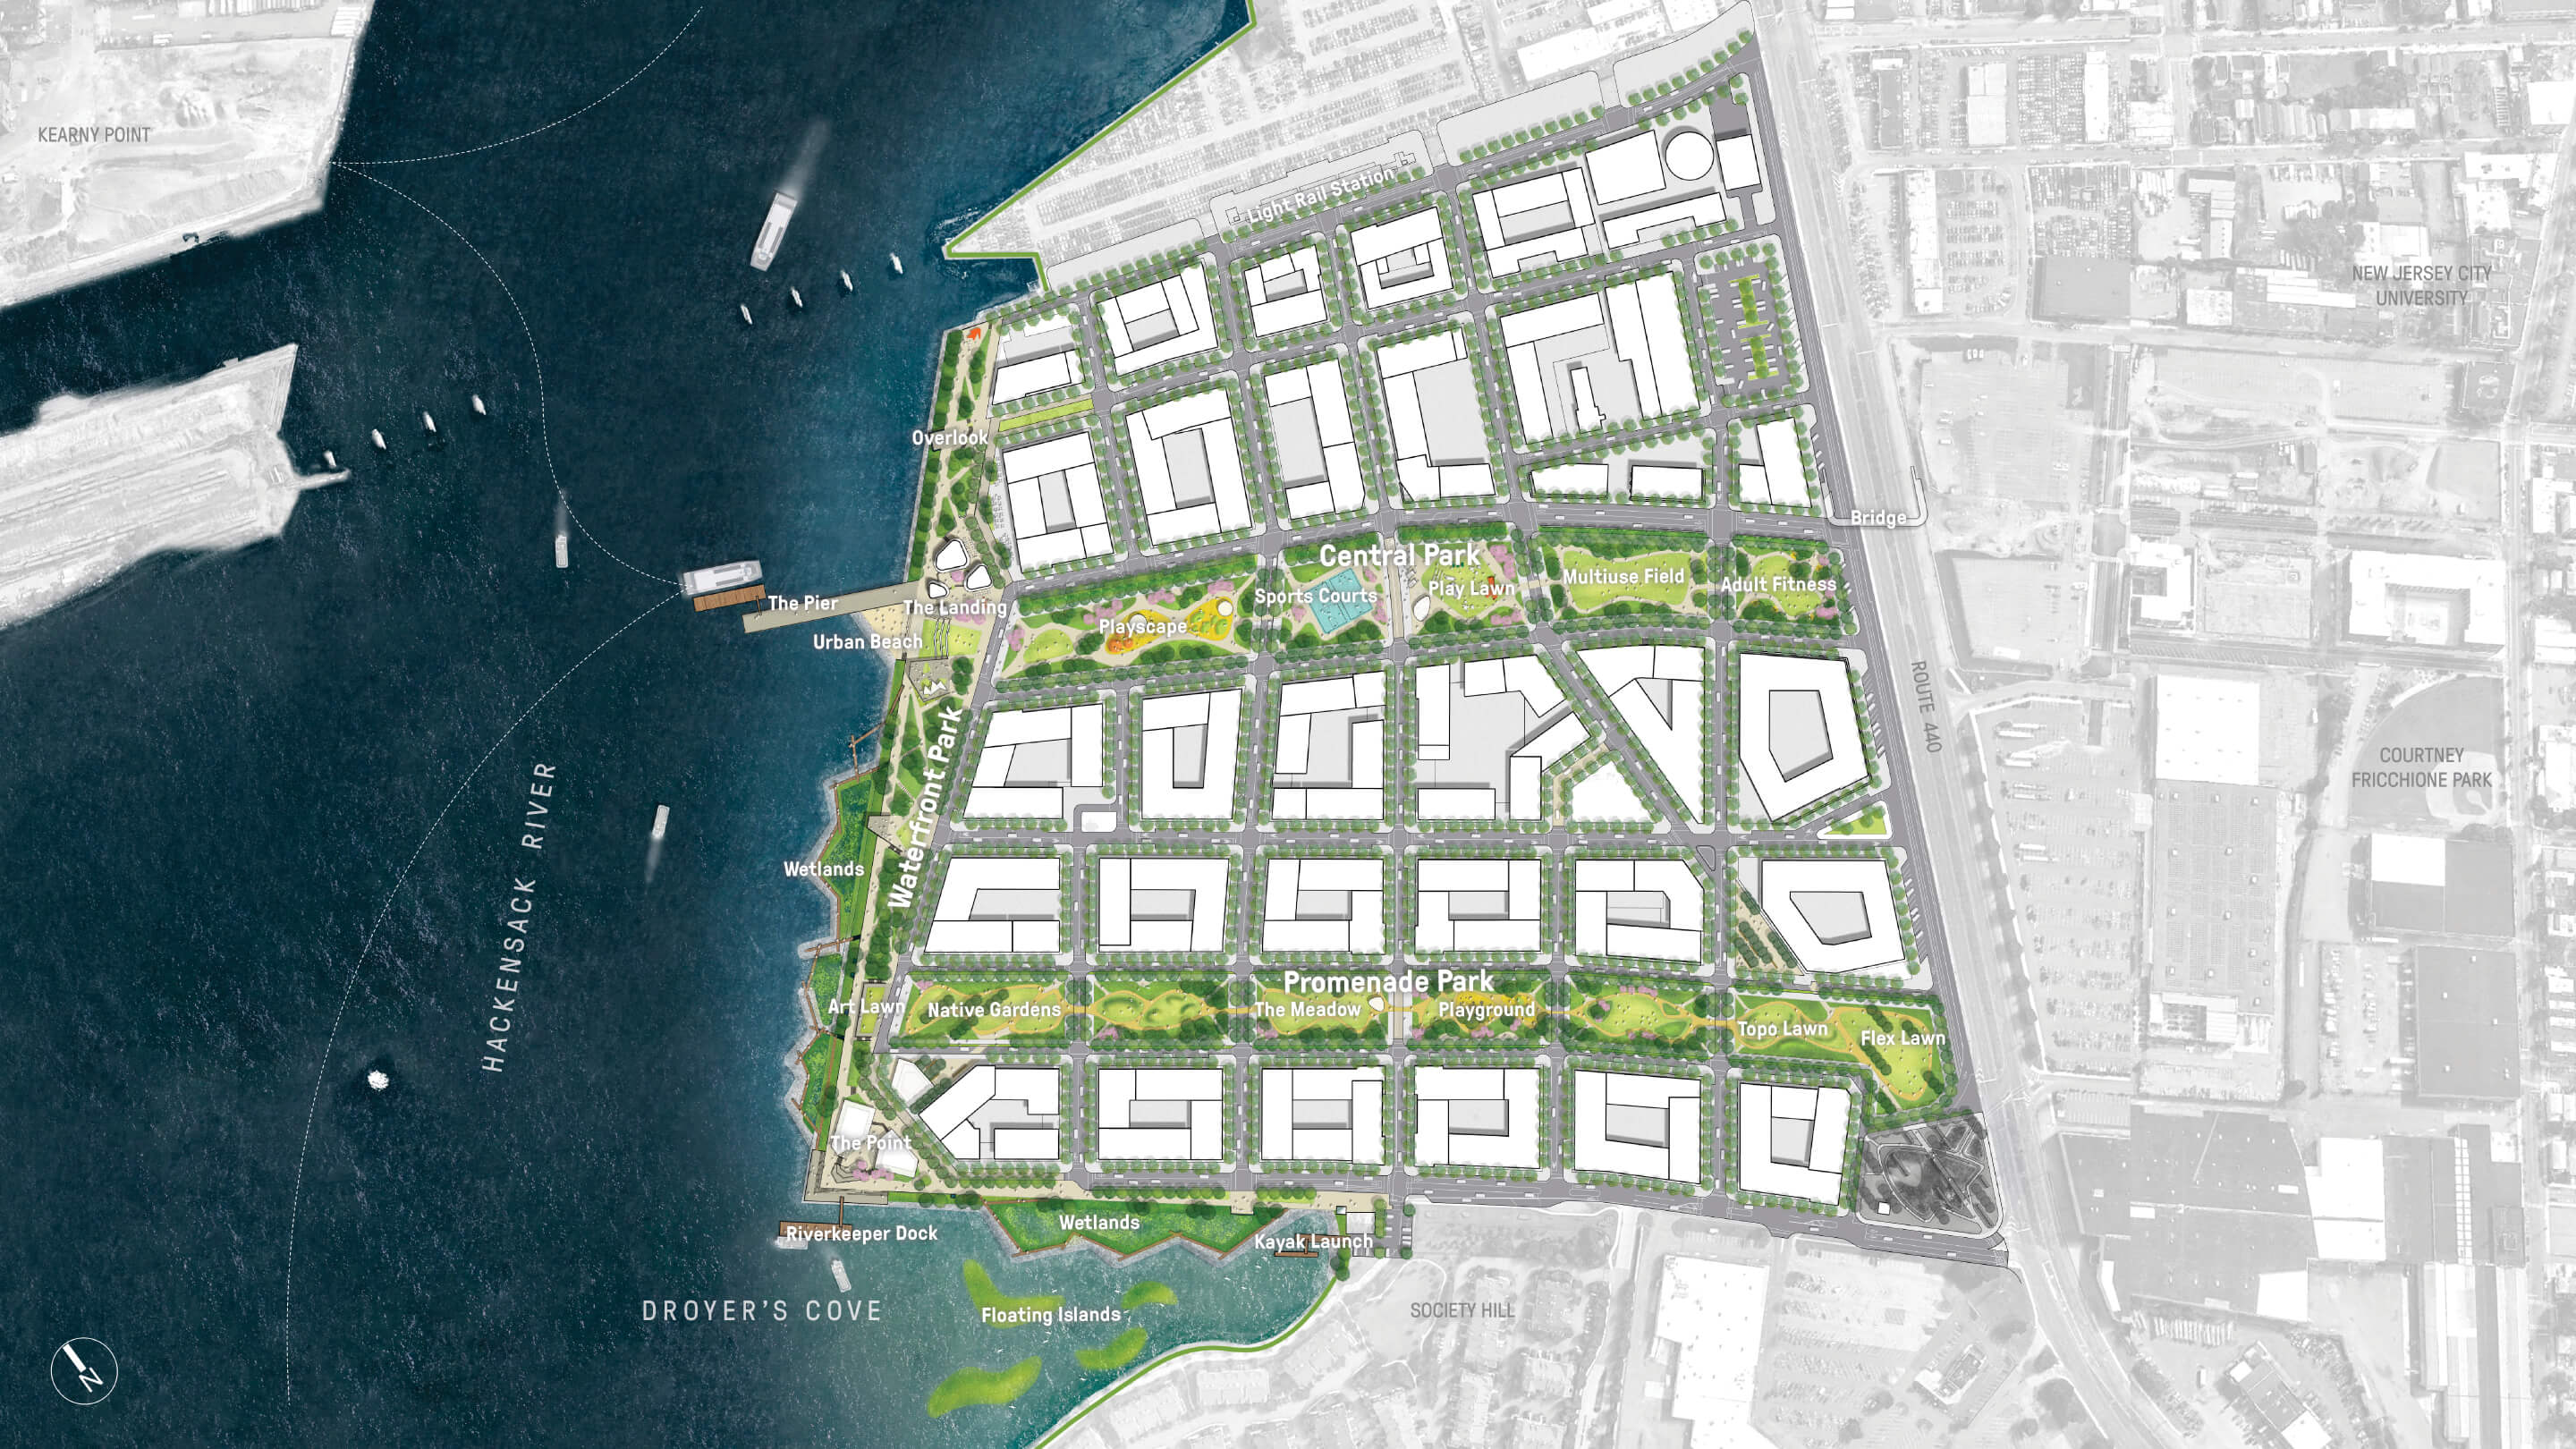 An aerial site plan of the bayfront redevelopment on the hackensack river